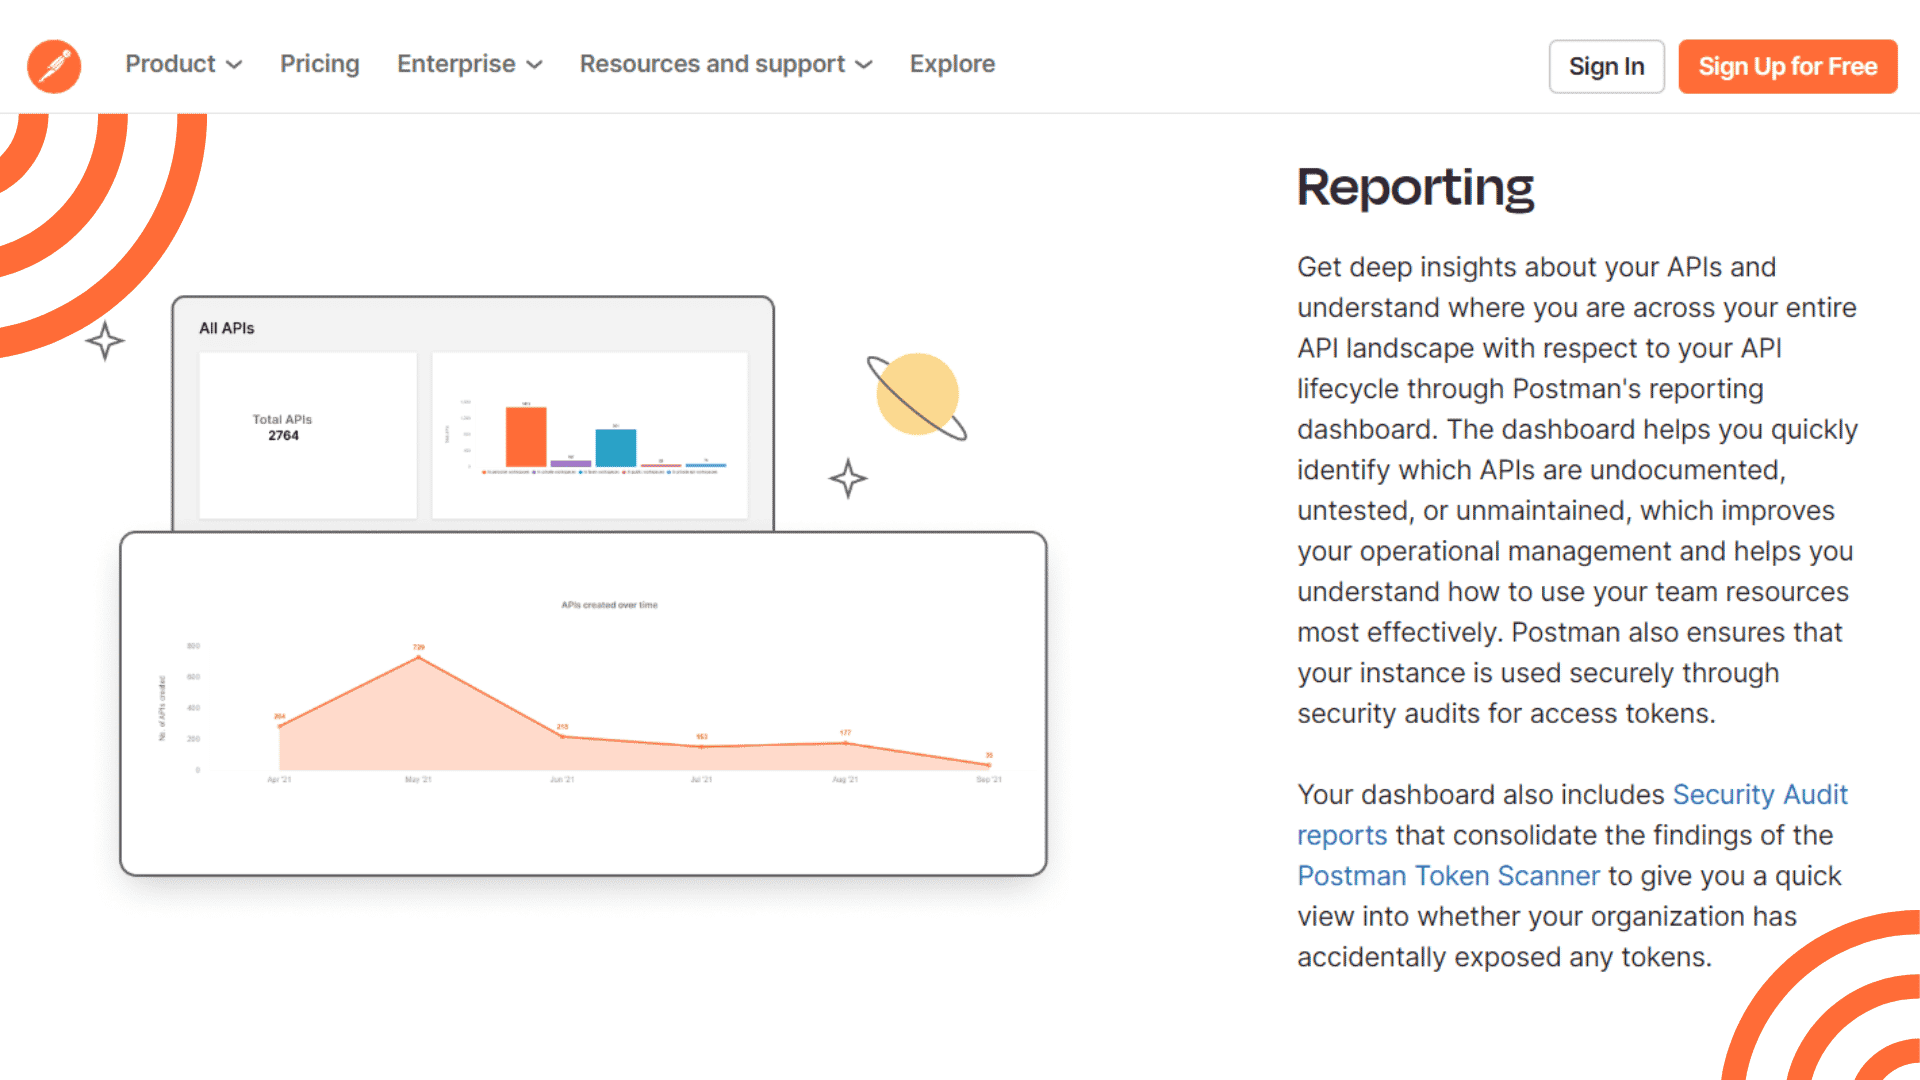 Key Features - Reporting